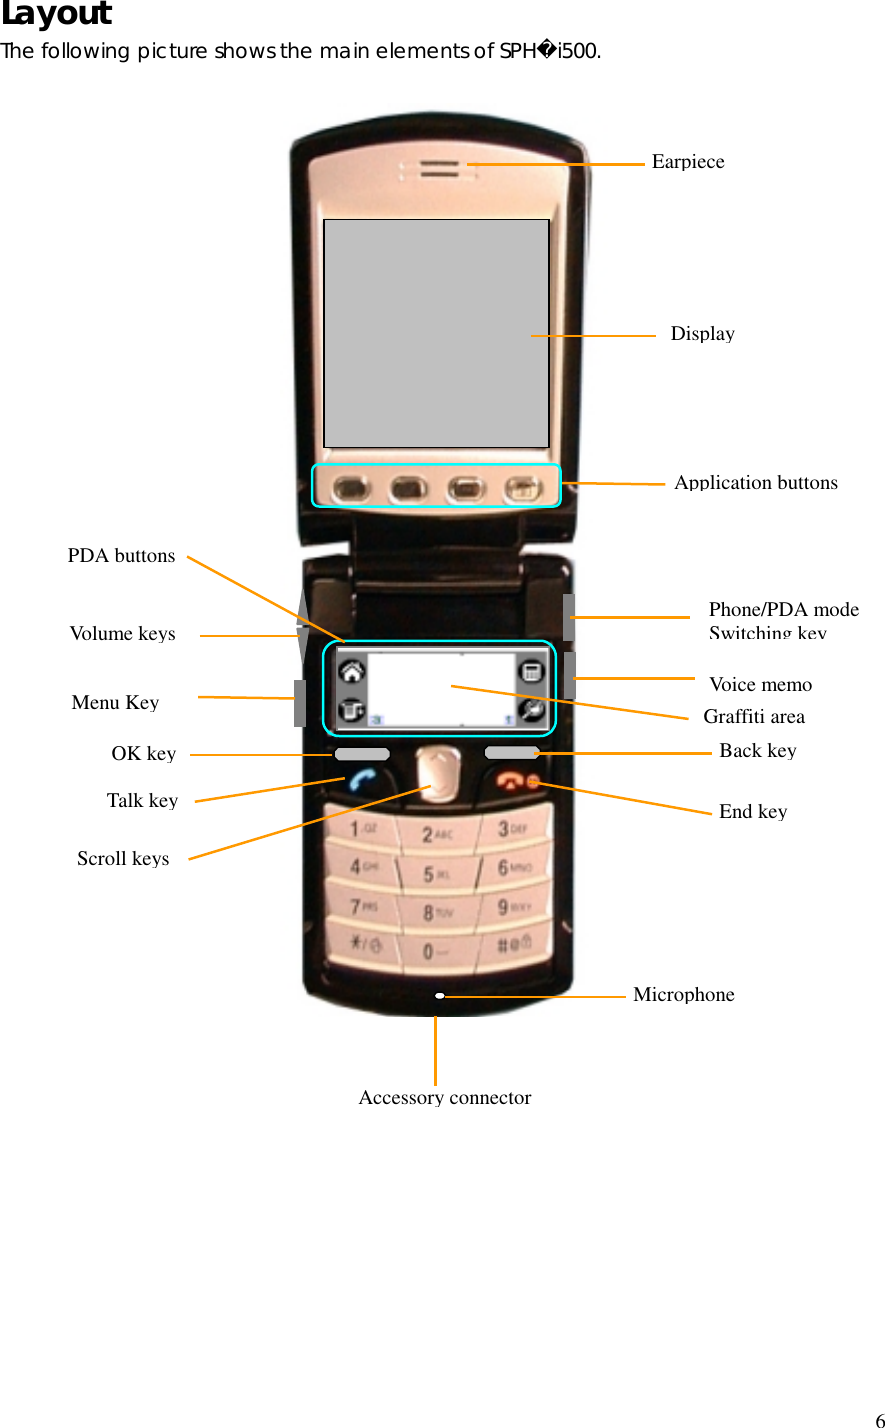  6 Layout  The following picture shows the main elements of SPHi500.                                             Earpiece Back key Menu Key Phone/PDA mode   Switching keyDisplay Application buttons End key Volume keys Voice memo OK key Talk key Scroll keys Accessory connector Microphone PDA buttons Graffiti area 